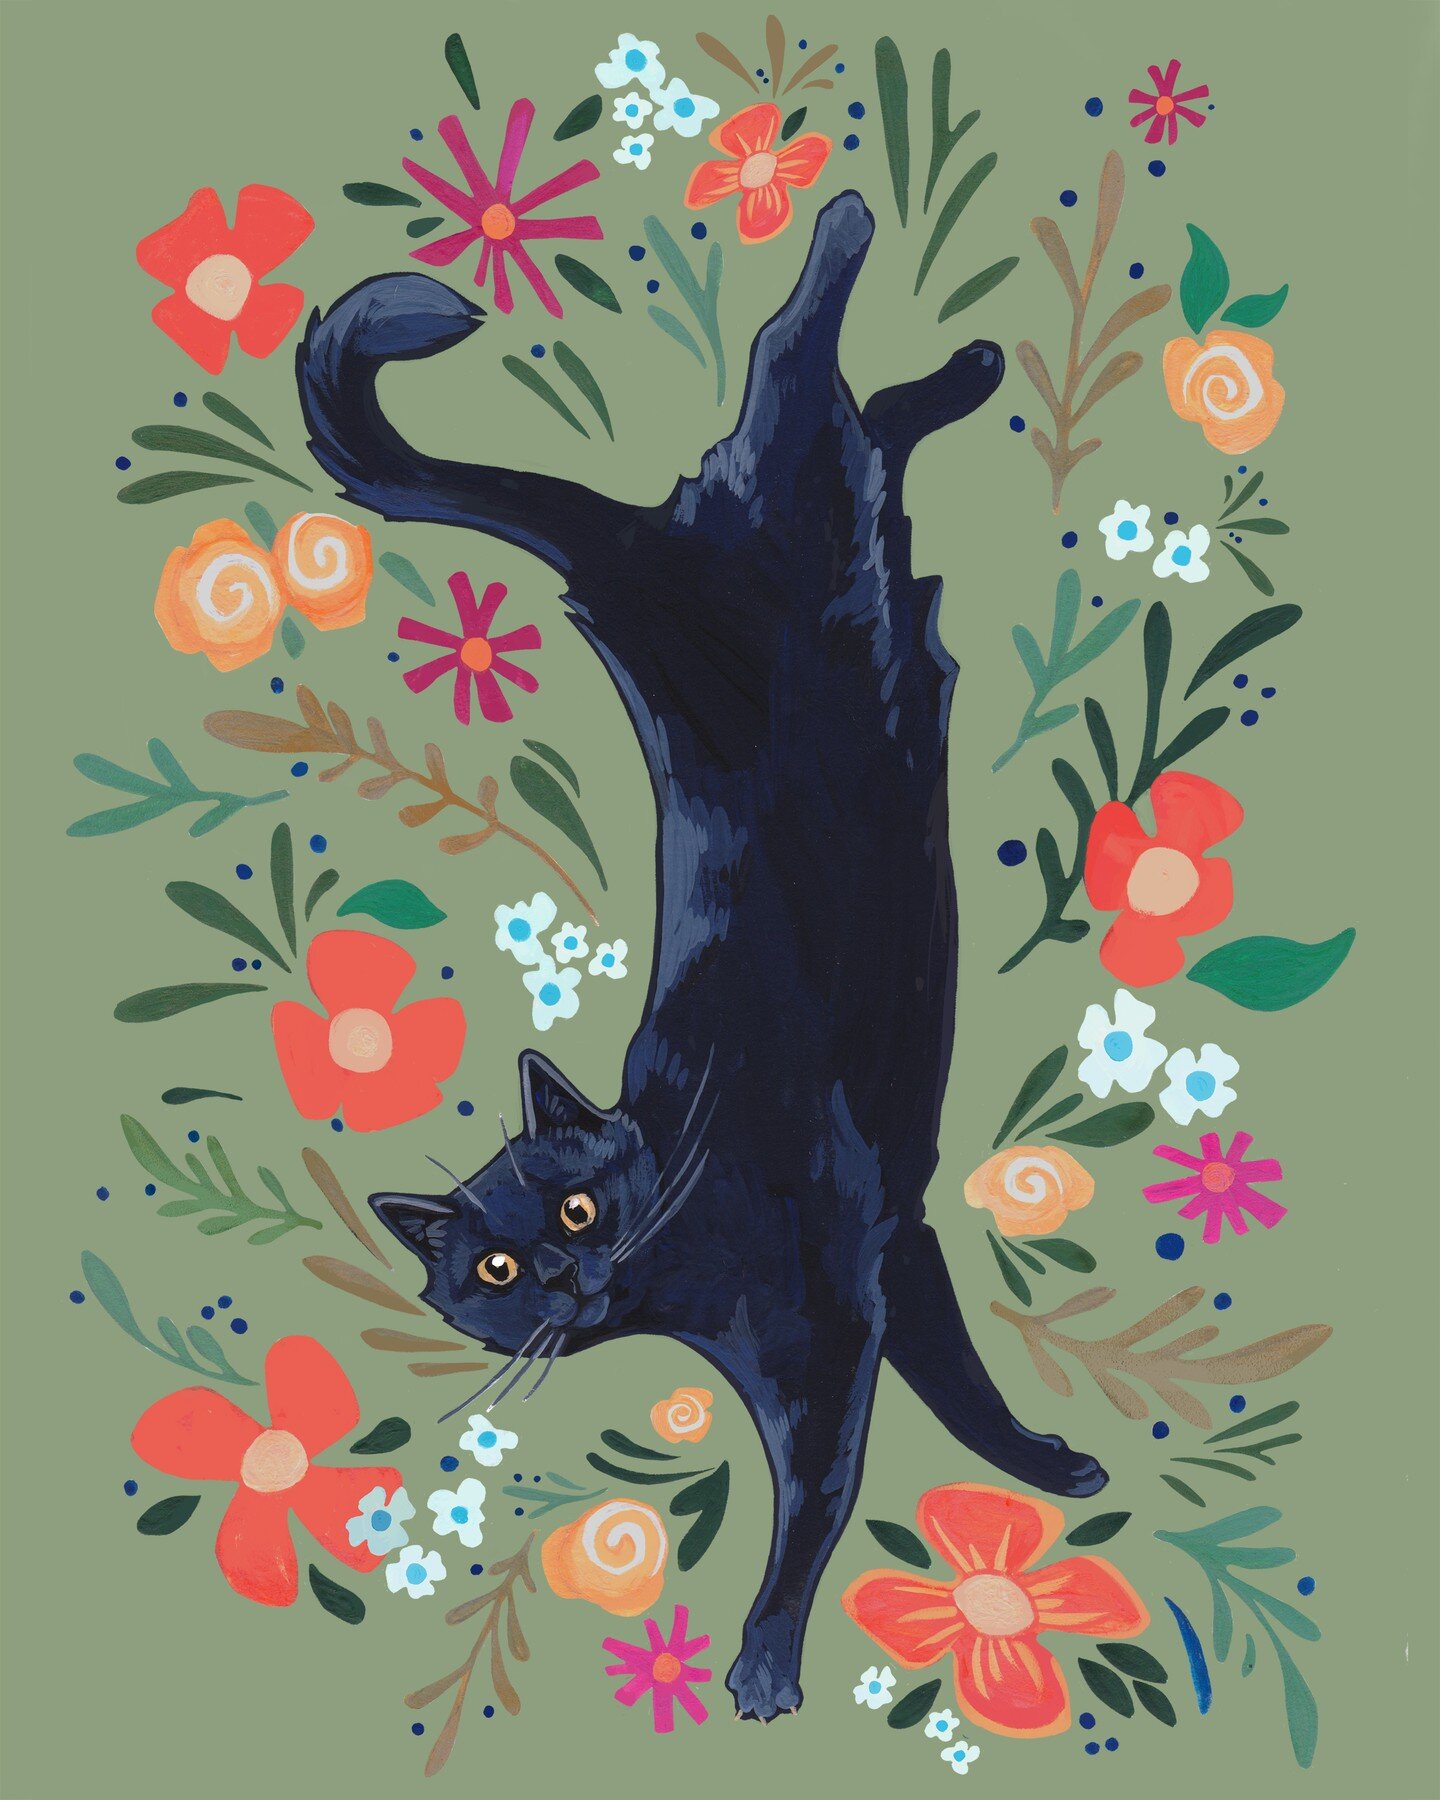 It's still #internationalcatday, right?!

Happy day to all of my favorite feline friends! Even the ones who meow at me excessively for dinner (looking at you, Lily)

Gouache and digital, print size 8x10&quot; (coming soon!)

#internationalcatday2022 